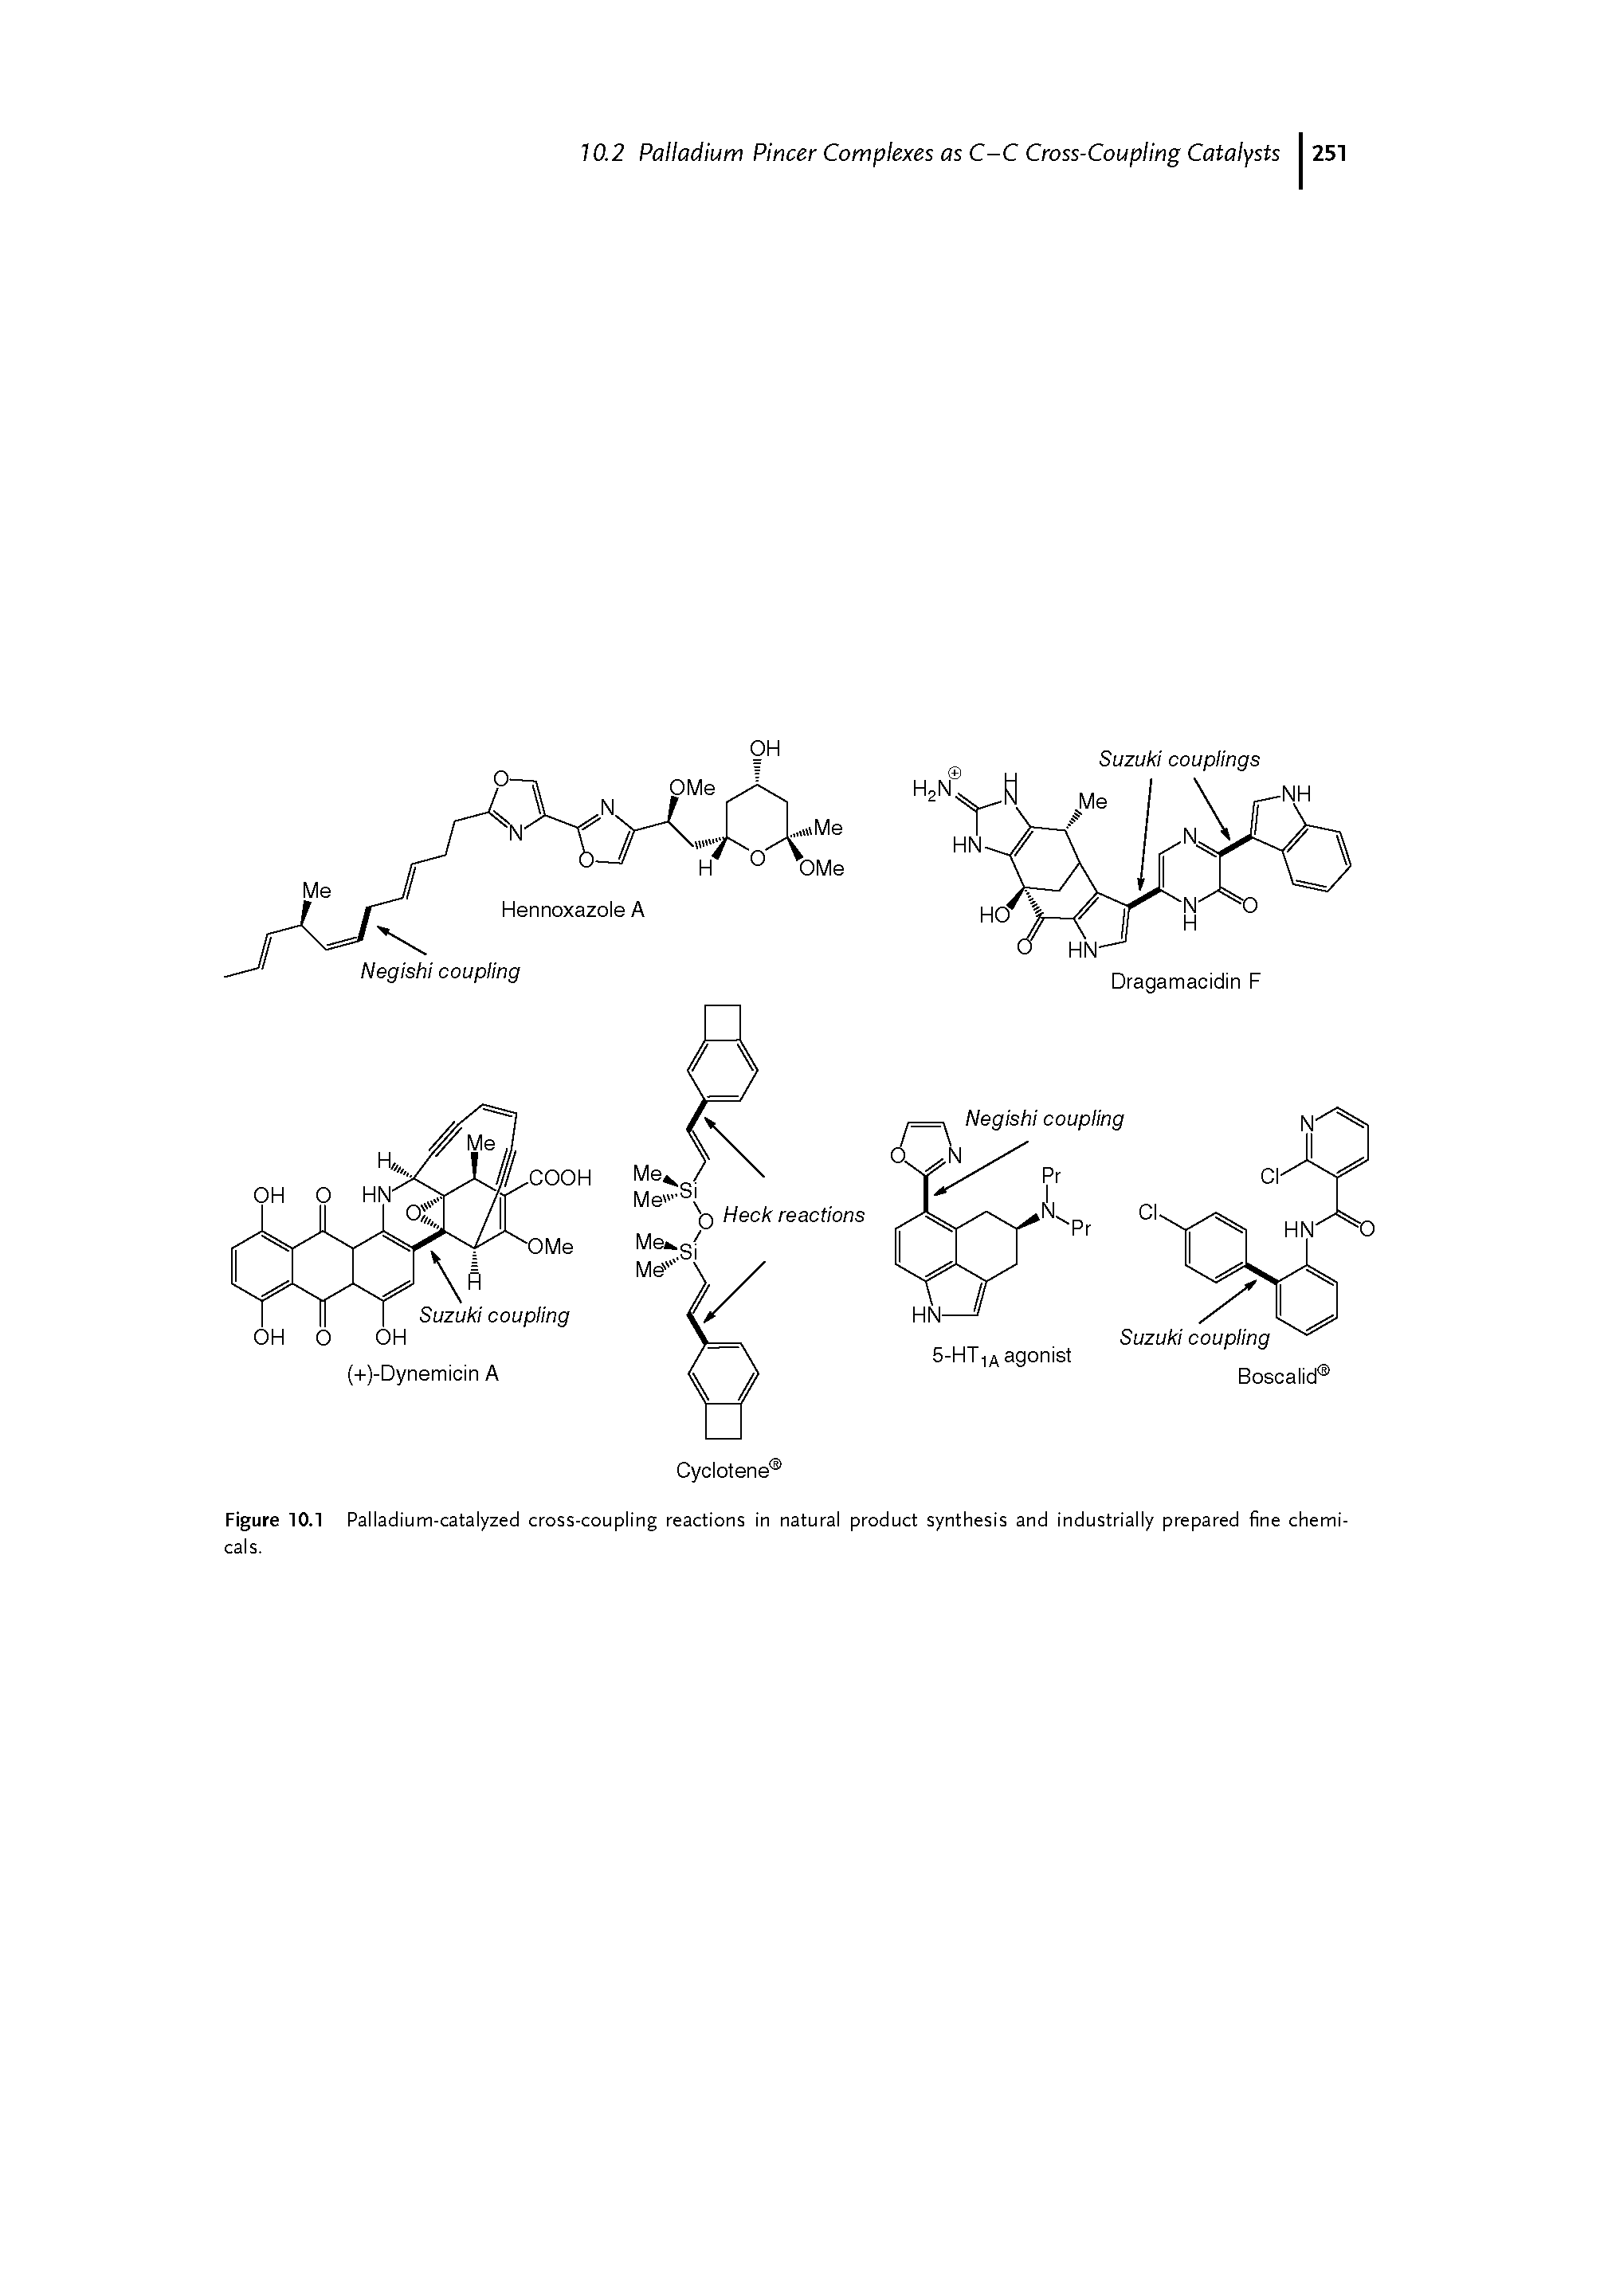 Figure 10.1 Palladium-catalyzed cross-coupling reactions in natural product synthesis and industrially prepared fine chemicals.